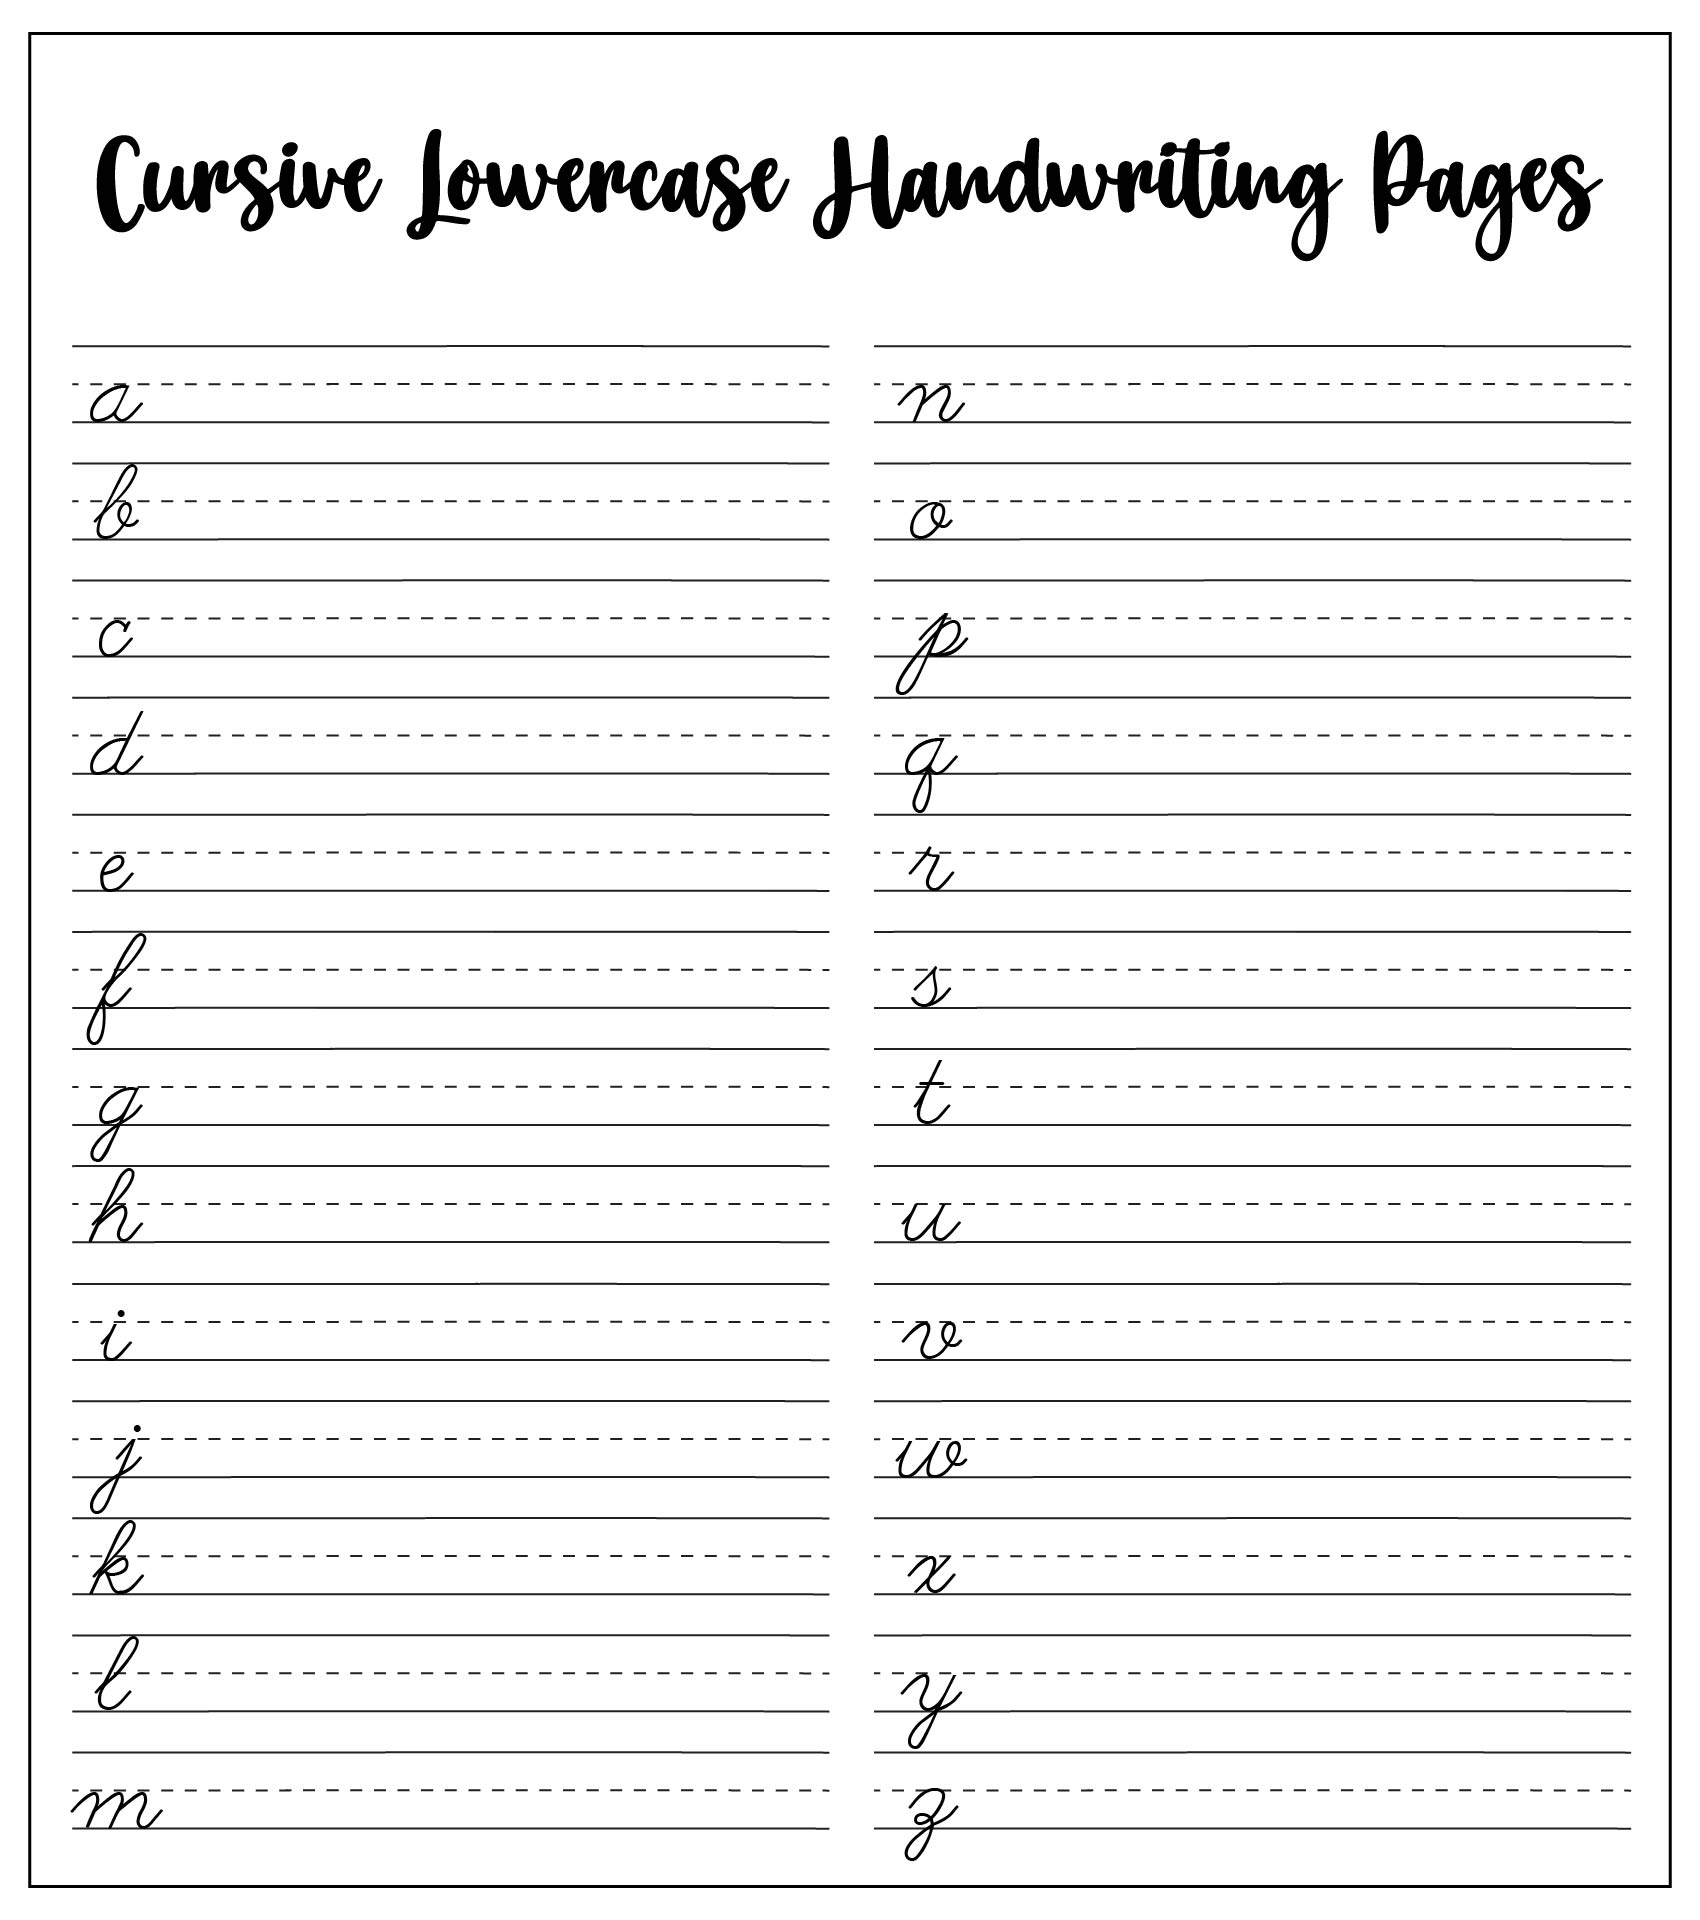 Cursive Handwriting Pages For Lowercase Printable